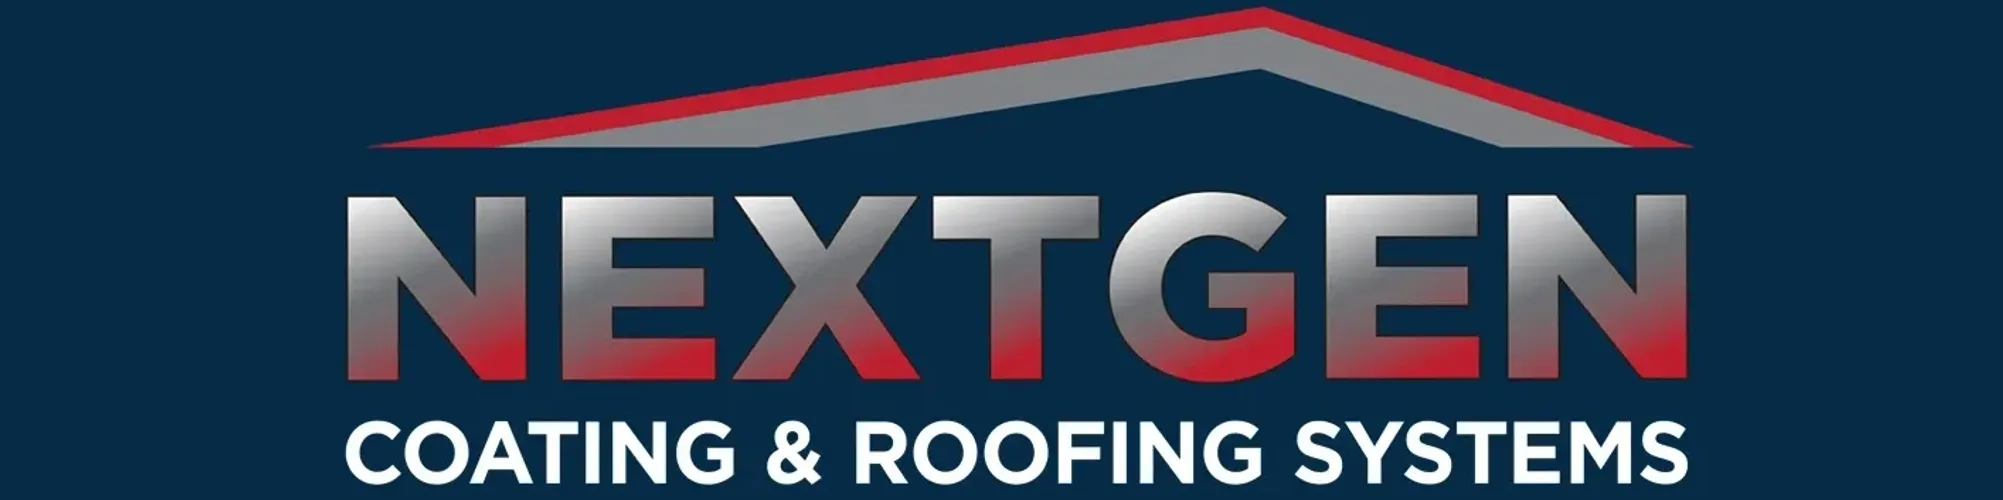 Next Gen Coating & Roofing Systems